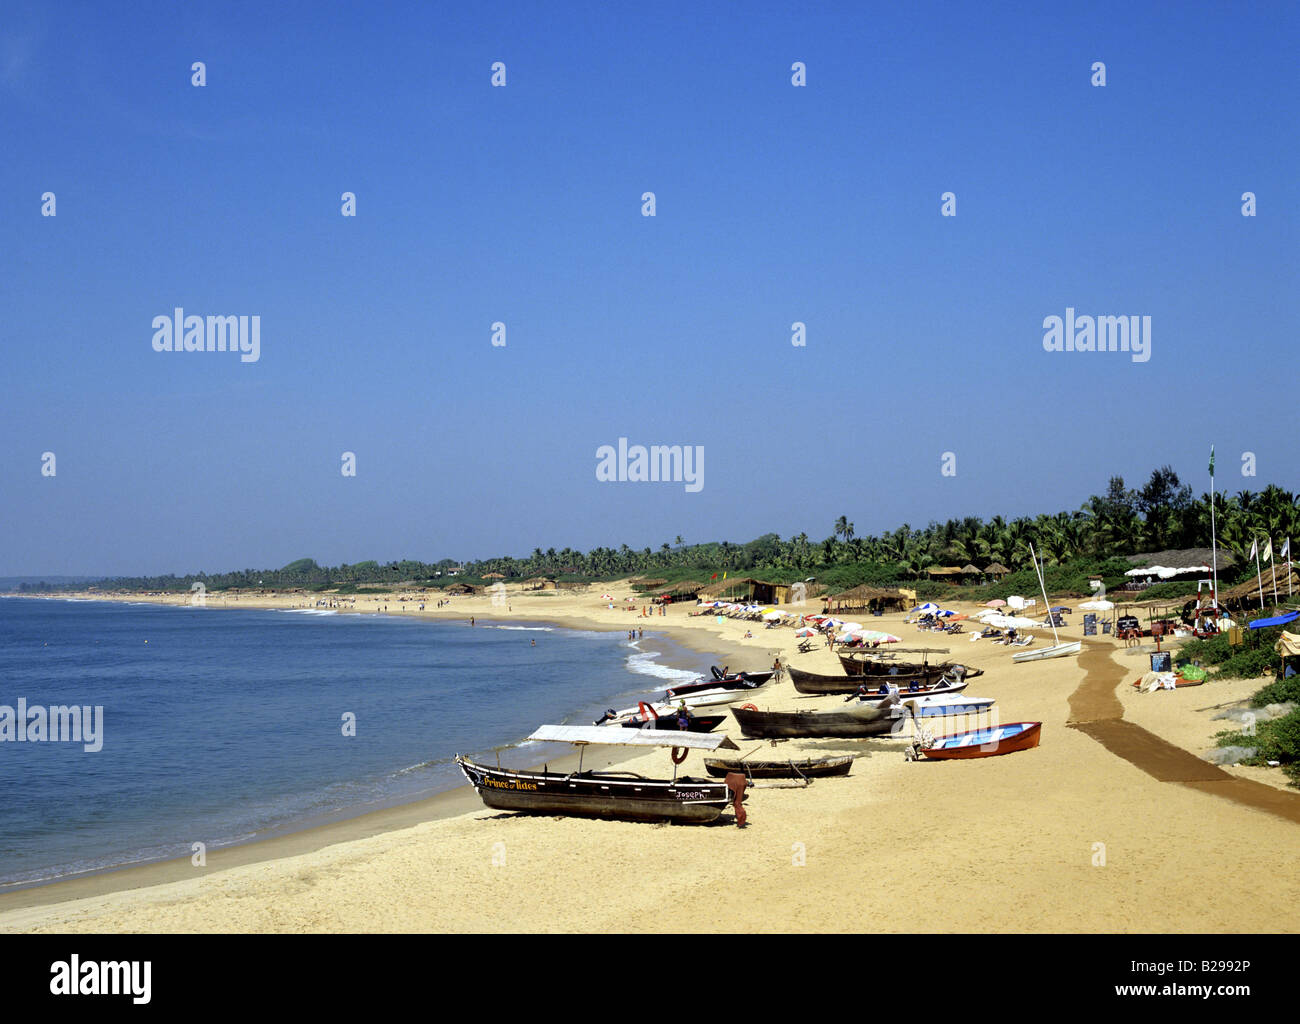 Fort Aguada Beach Goa State India Date 15 06 2008 Ref ZB548 115573 0091 COMPULSORY CREDIT World Pictures Photoshot Stock Photo